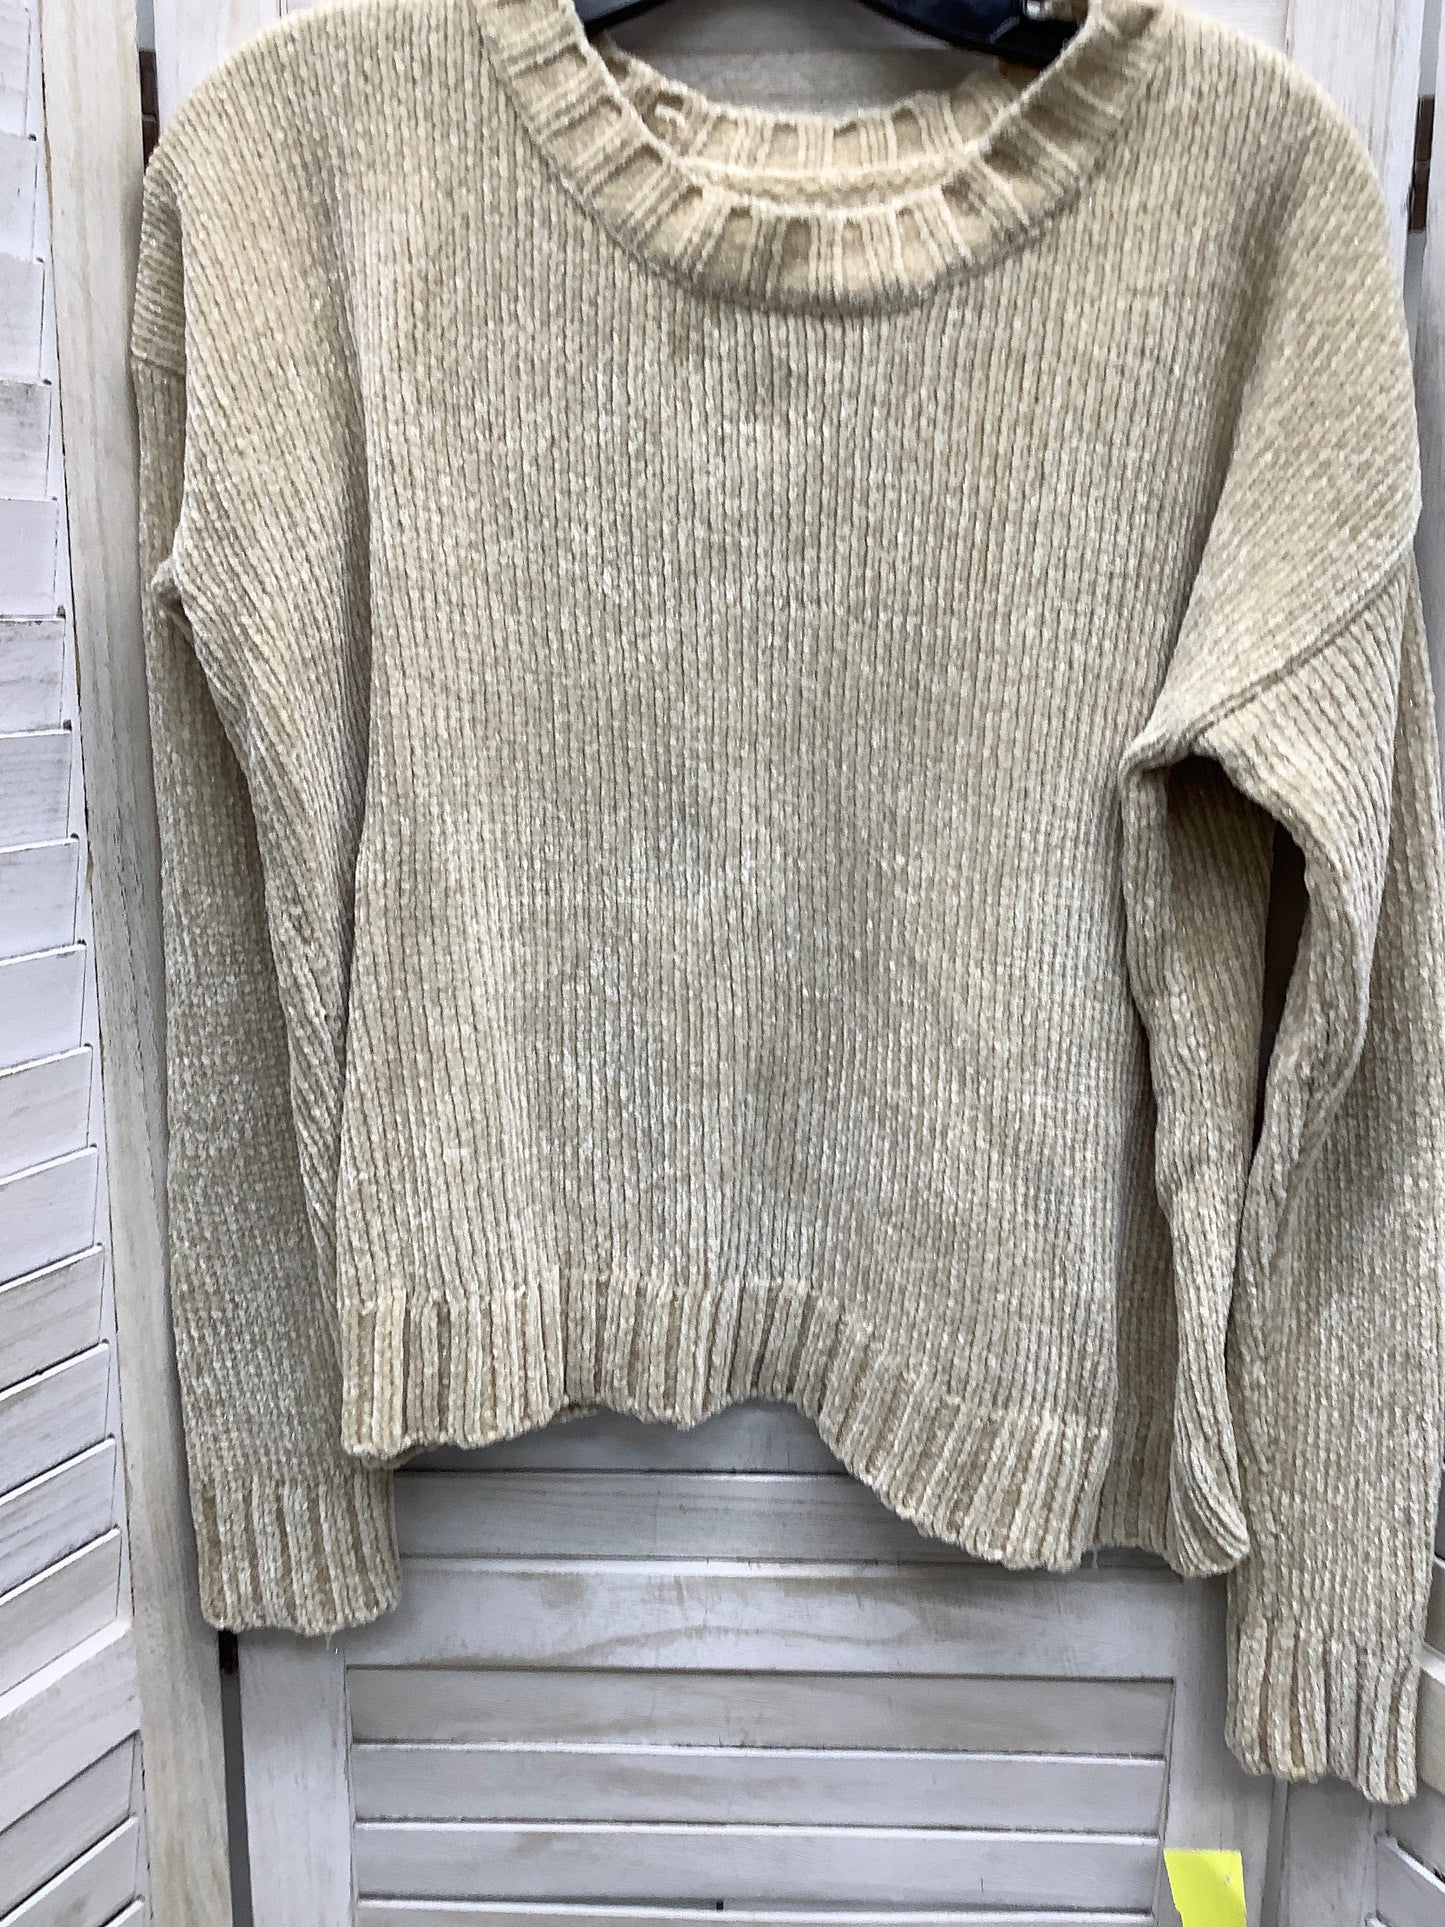 Sweater By Aerie  Size: S